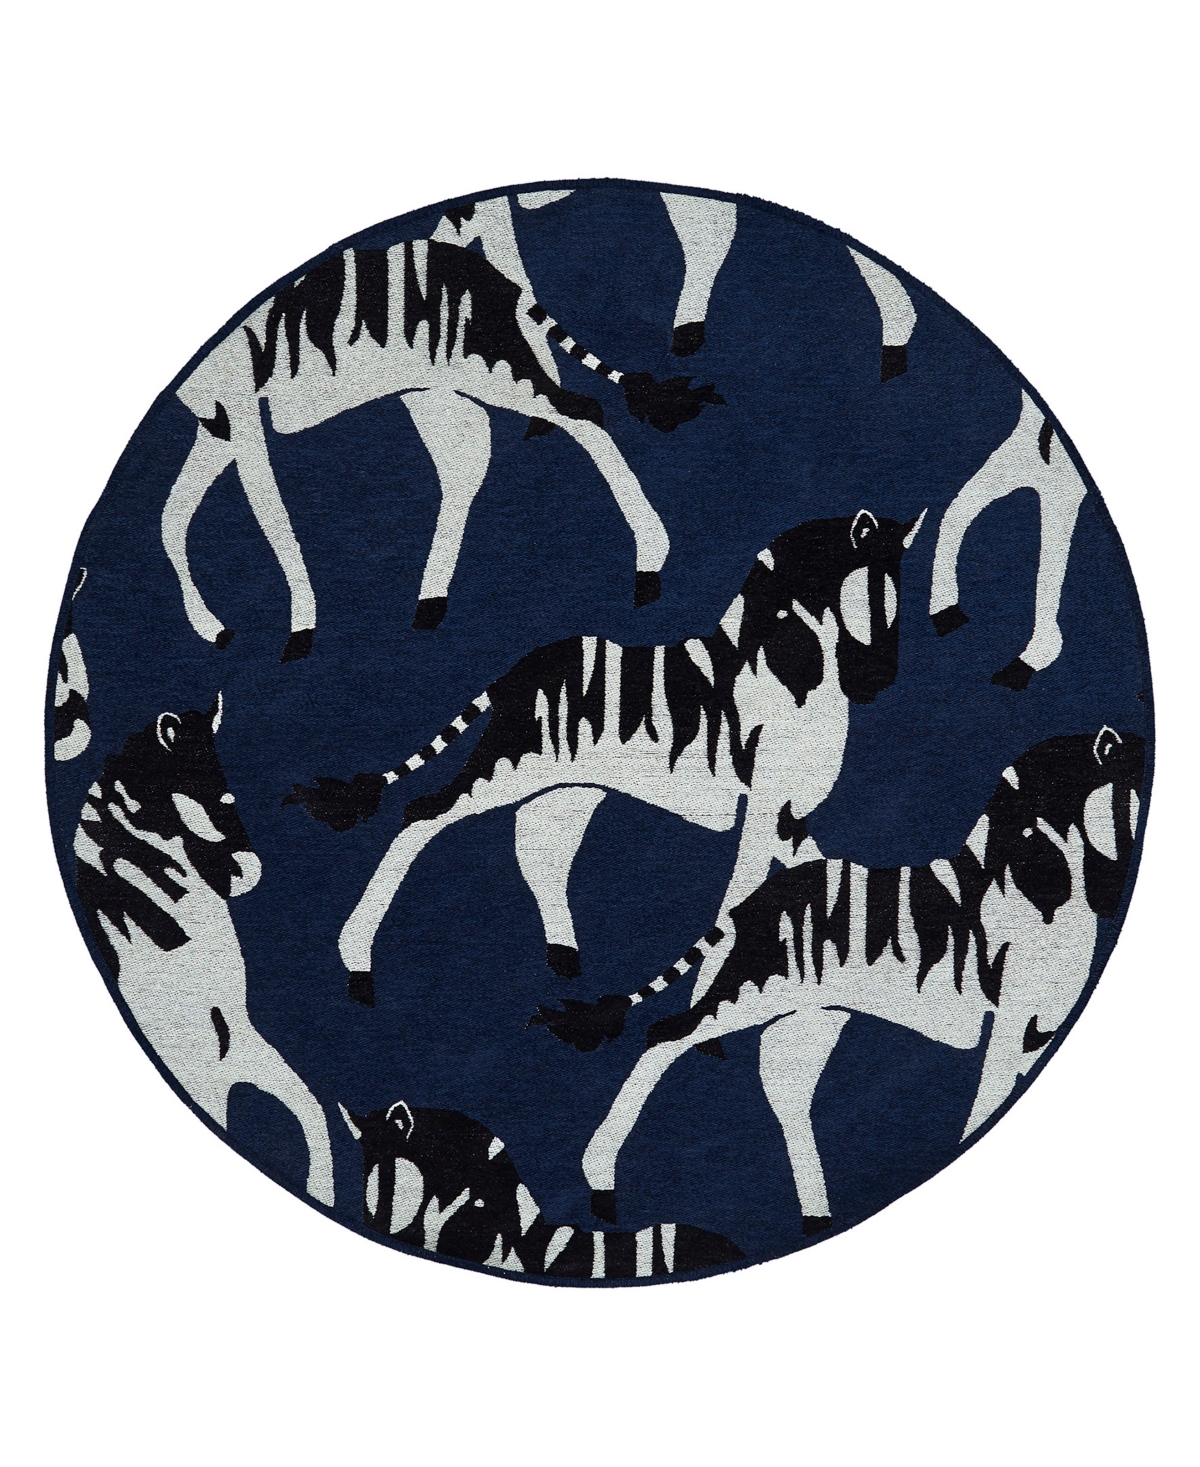 Hilary Farr Forever Fauna Hfa02-38 5' X 5' Round Area Rug In Navy